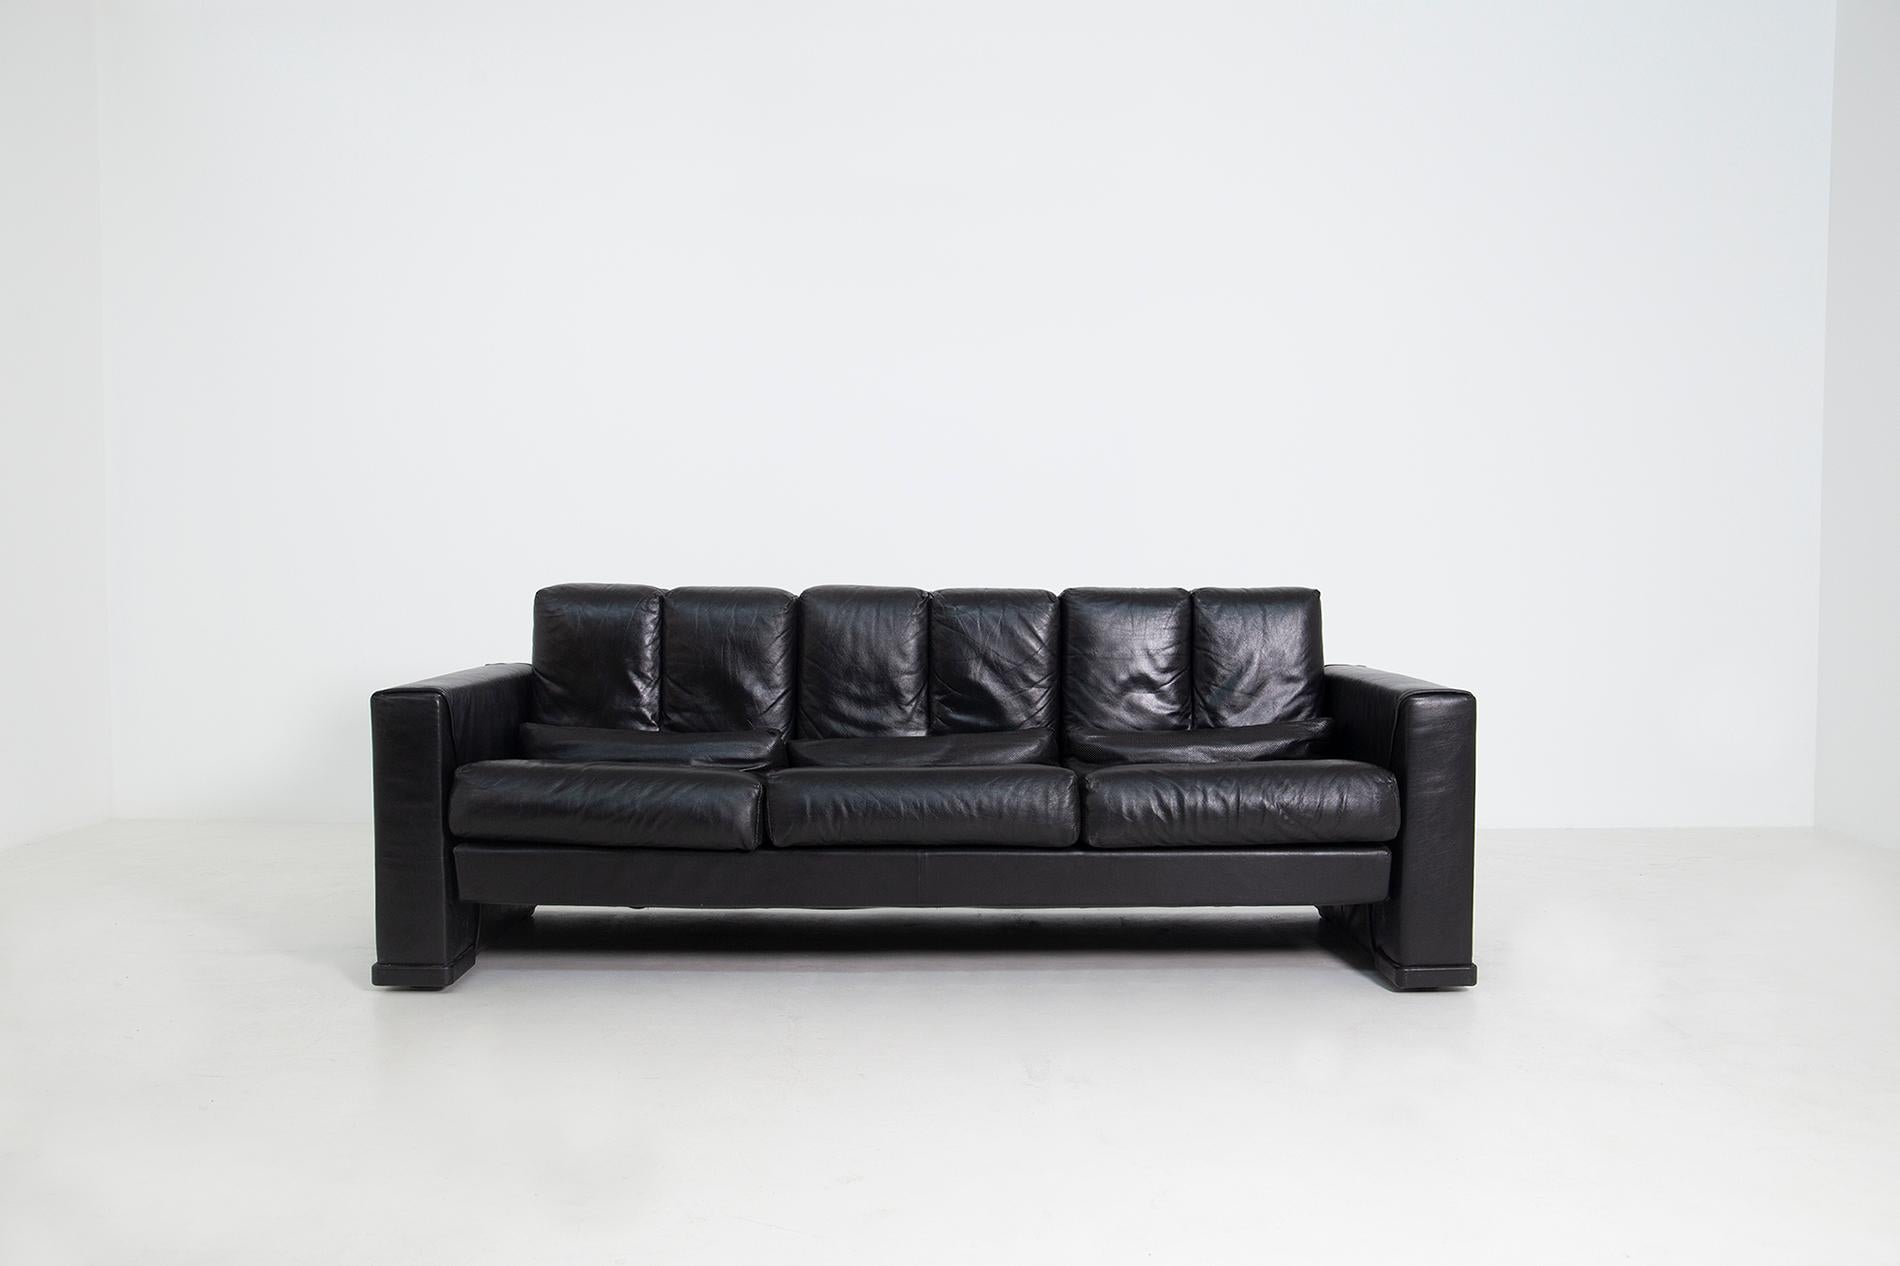 Modern Italian sofa designed by Mario Bellini for B&B Italia in 1985. The sofa is entirely covered in black leather with a steel frame with special profiles. The padding is in cold polyurethane foam. The peculiarity of the sofa are its perforated